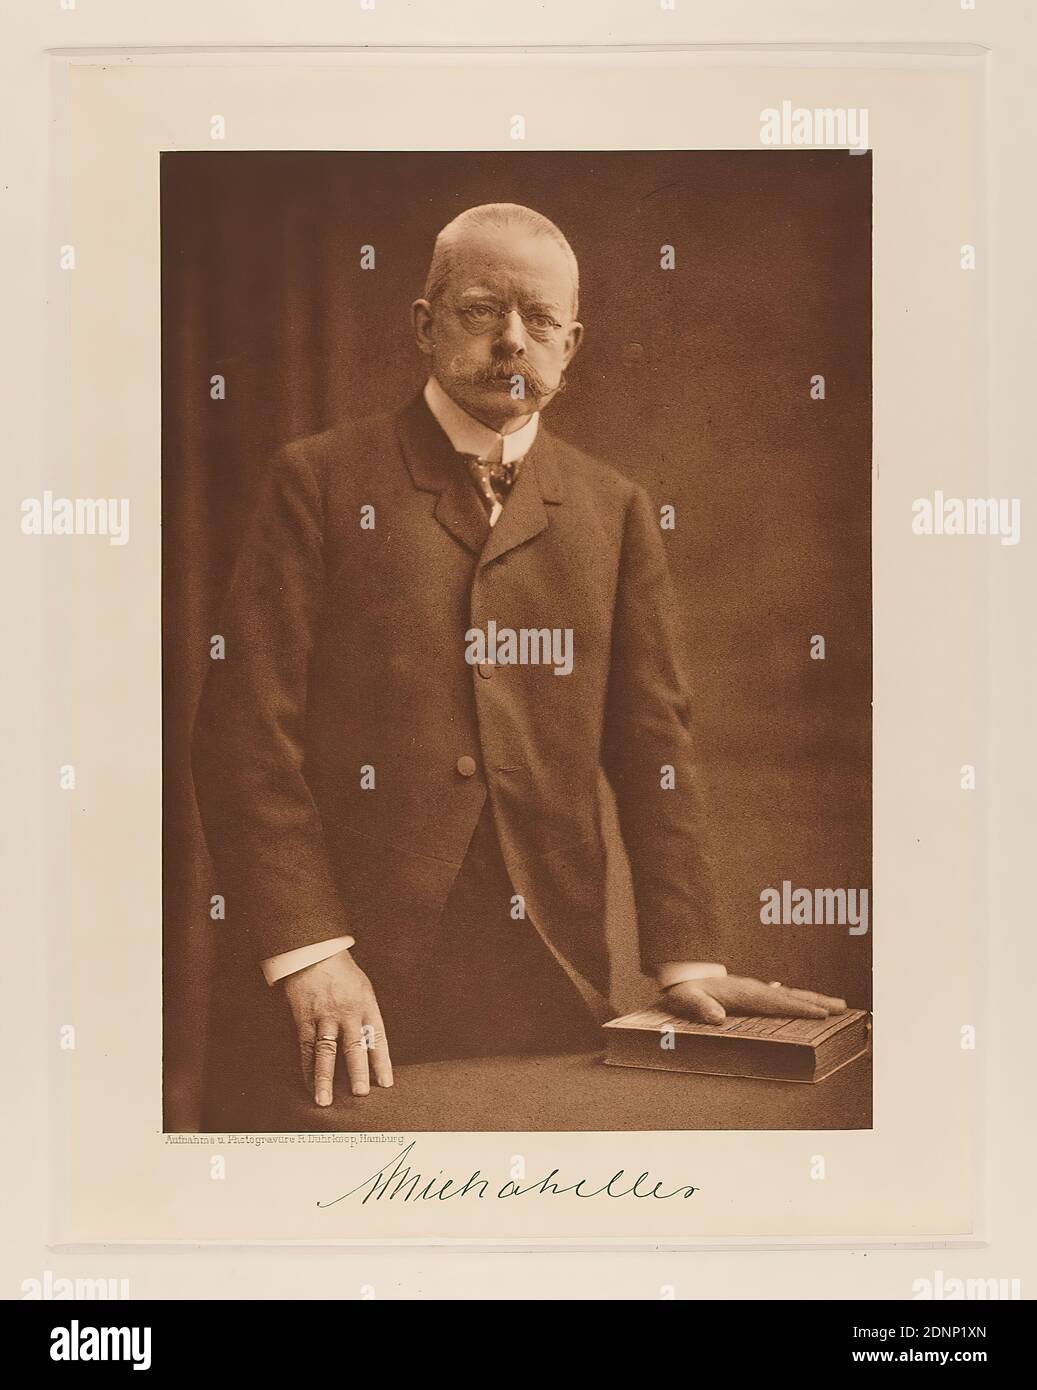 Rudolph Dührkoop, Alfred Michahelles i. F. Michahelles, Chairman of the Chamber of Commerce and member of the Bürgerschaft from the portfolio Hamburgische Männer und Frauen am Anfang des XX. Jahrhunderts, Staatliche Landesbildstelle Hamburg, collection on the history of photography, paper, heliogravure, image size: height: 21,90 cm; width: 15,90 cm, signed: recto below the image: imprinted signature of the sitter, inscribed: recto: engraved on printing plate, below the image: photograph and photogravure R. Dührkoop, Hamburg, upper right in the corner in lead: 81, stamp: recto: handwritten Stock Photo